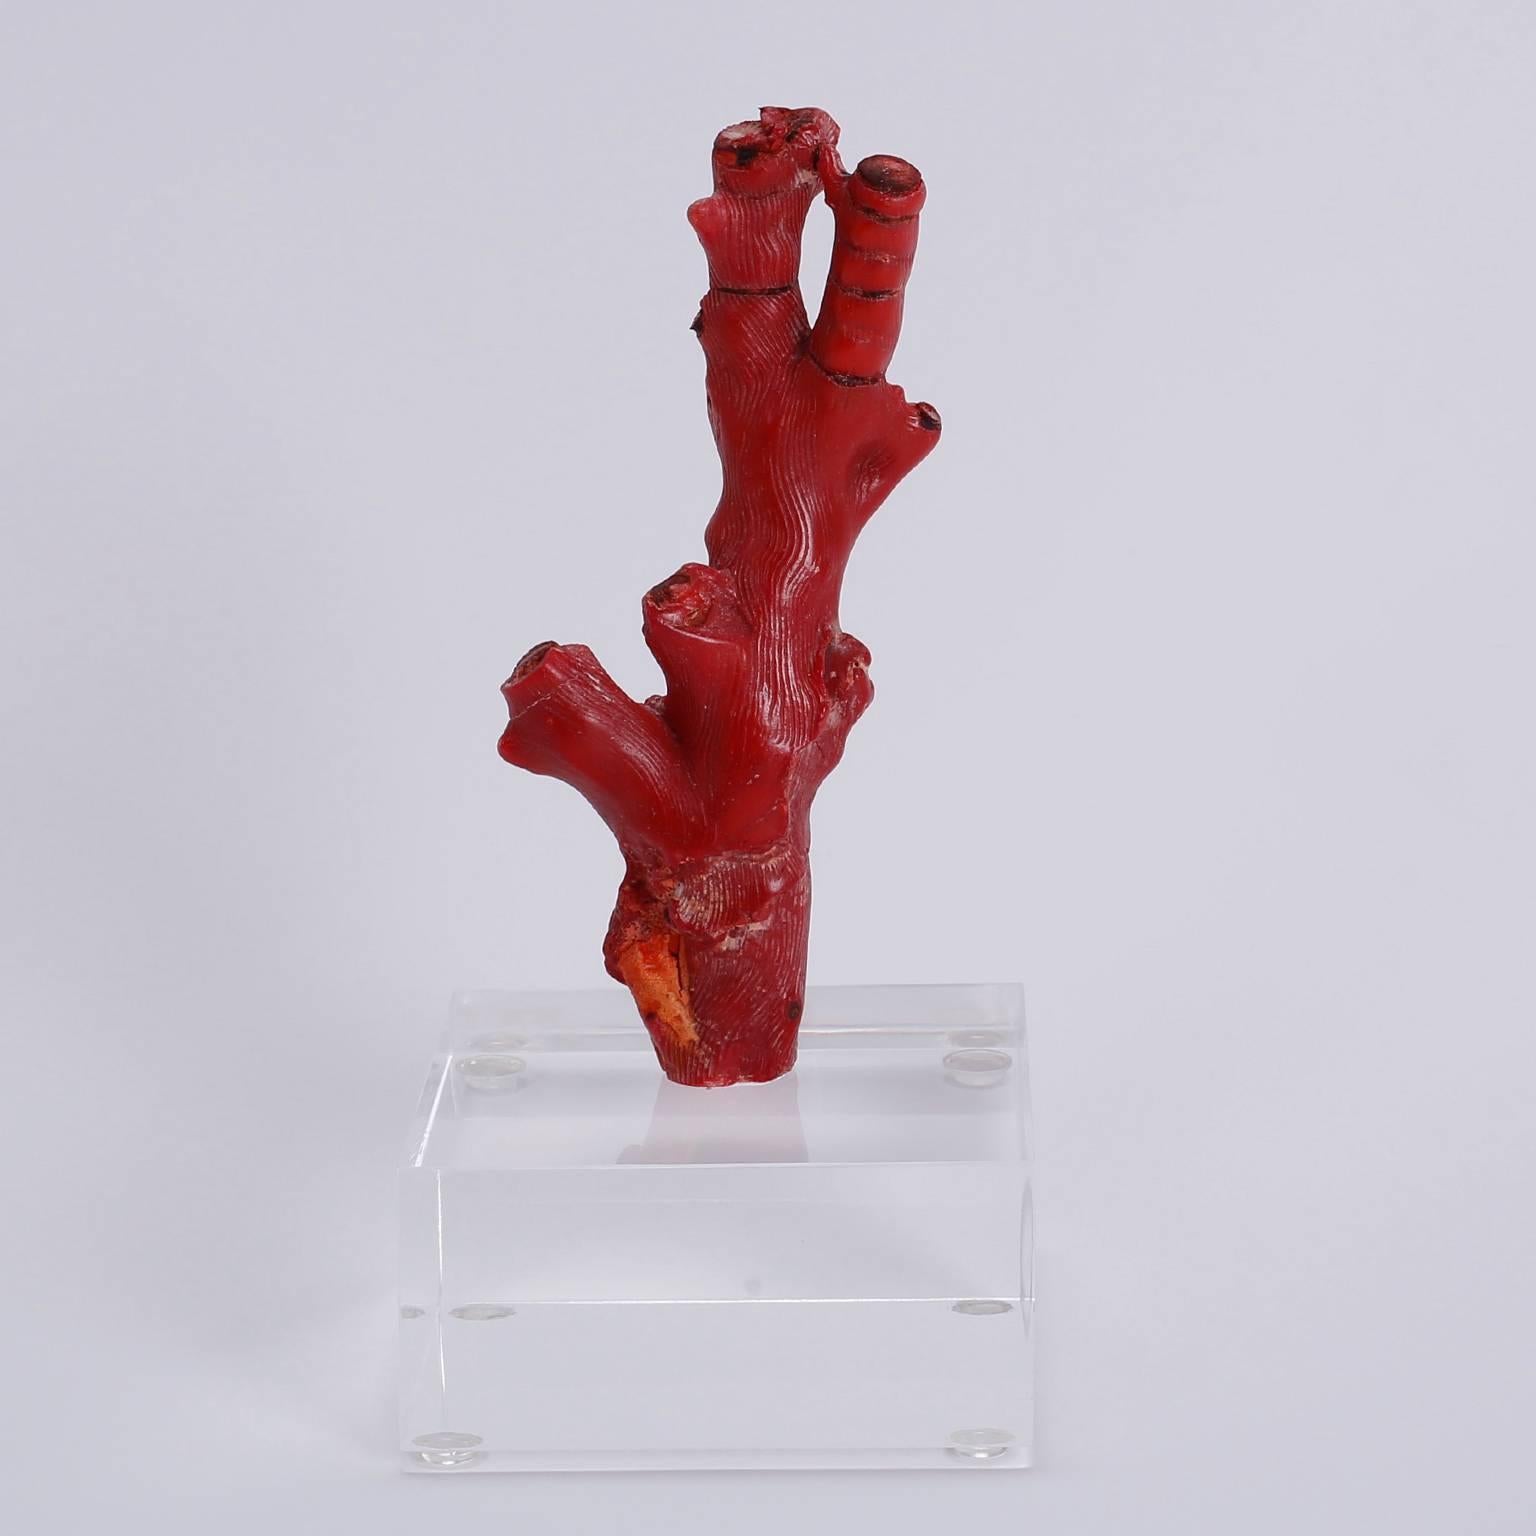 Three red coral specimens each with its own character, organic form, and alluring color. Presented on Lucite blocks to enhance the sculptural elements. Priced individually.

From left to right:

Ref: 3856A, H 8, W 4, D 4, $950.00
Ref: 3856B, H